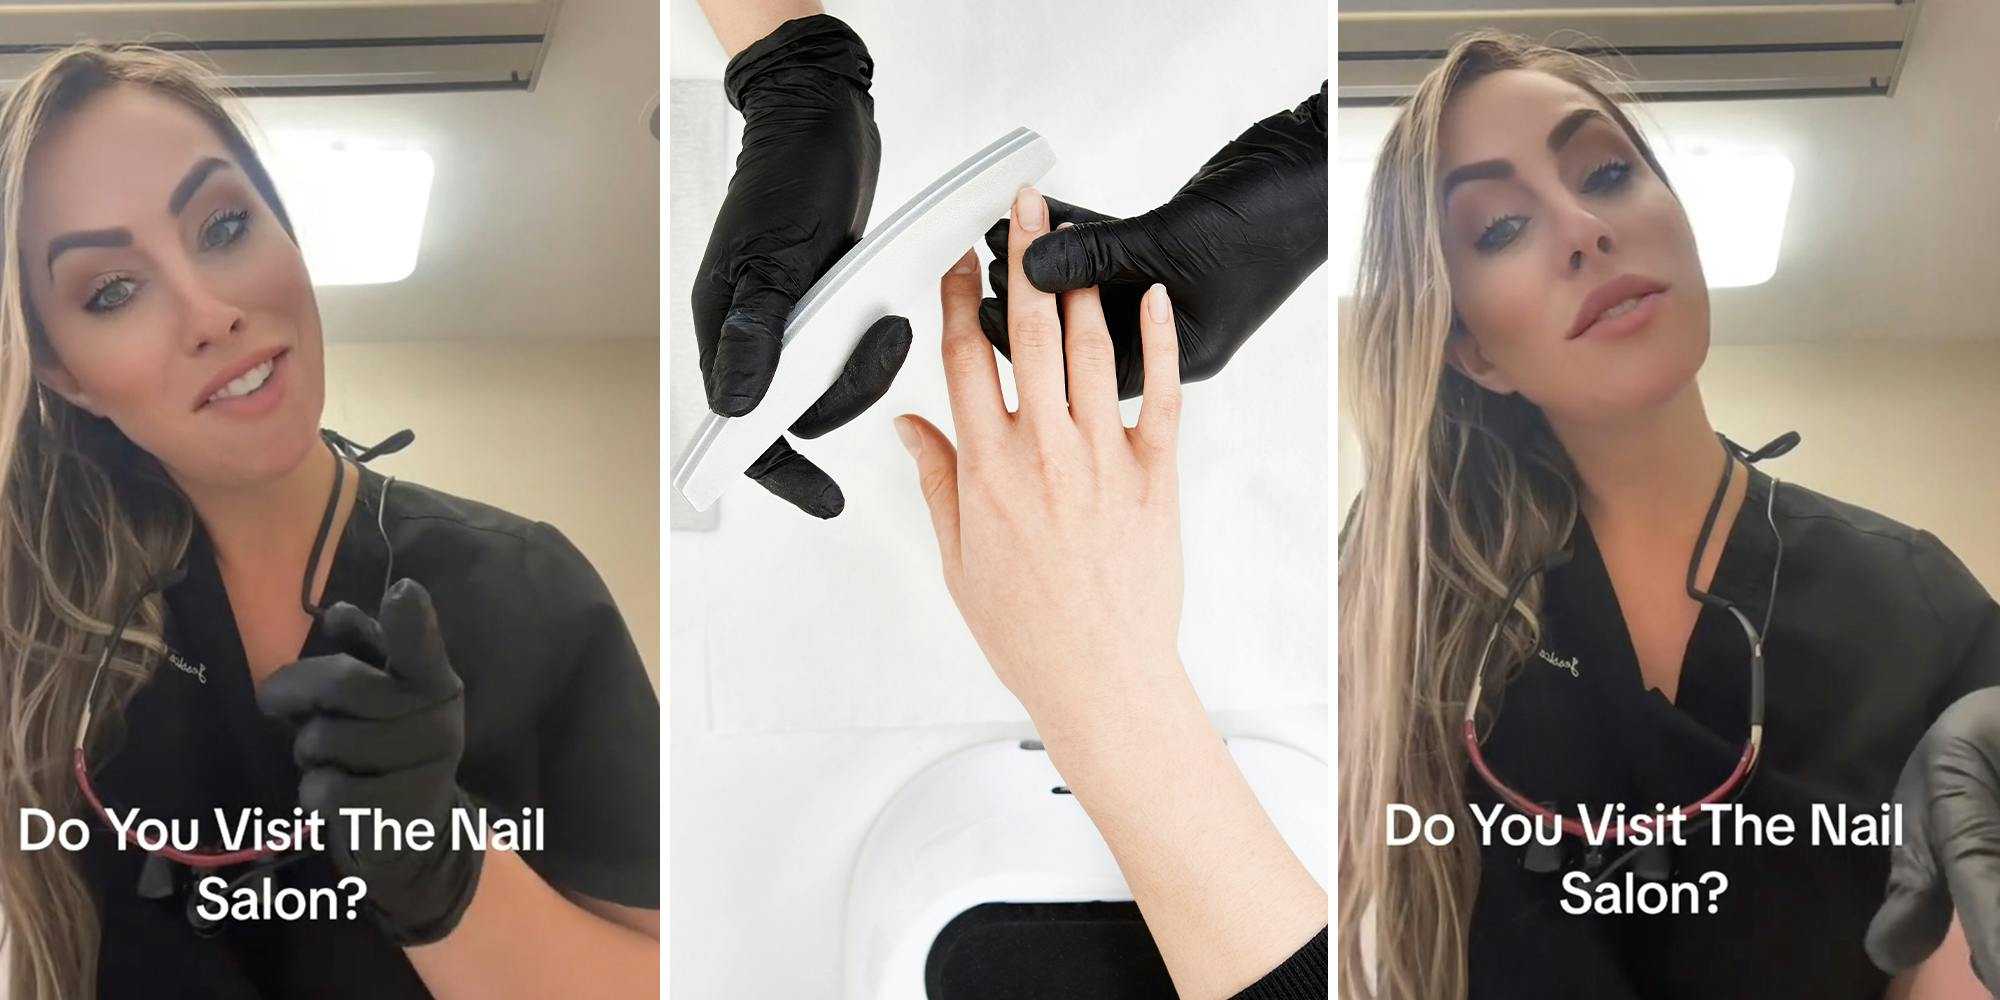 Nail technology shows whether your nail salon uses clean tools